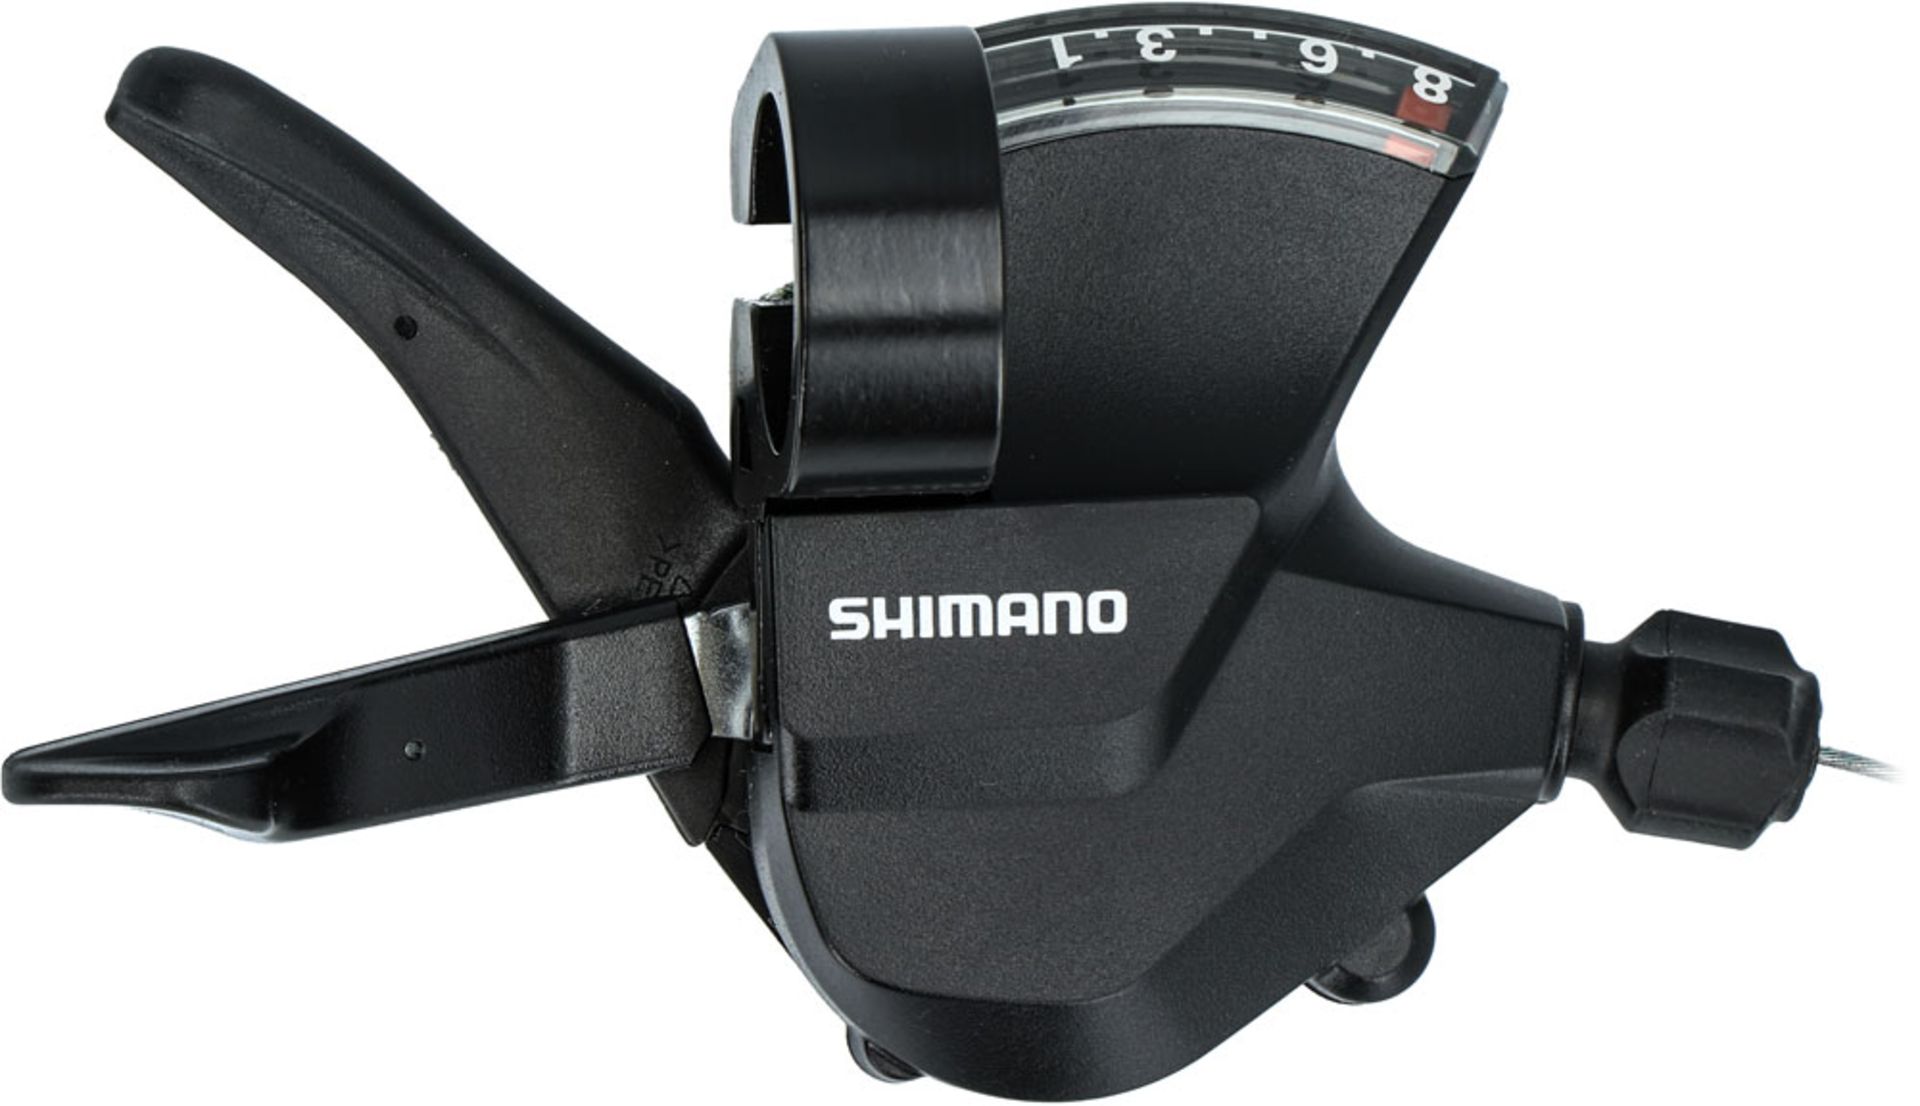 3 x Shimano SL-M315 8-speed Shift Levers, Right